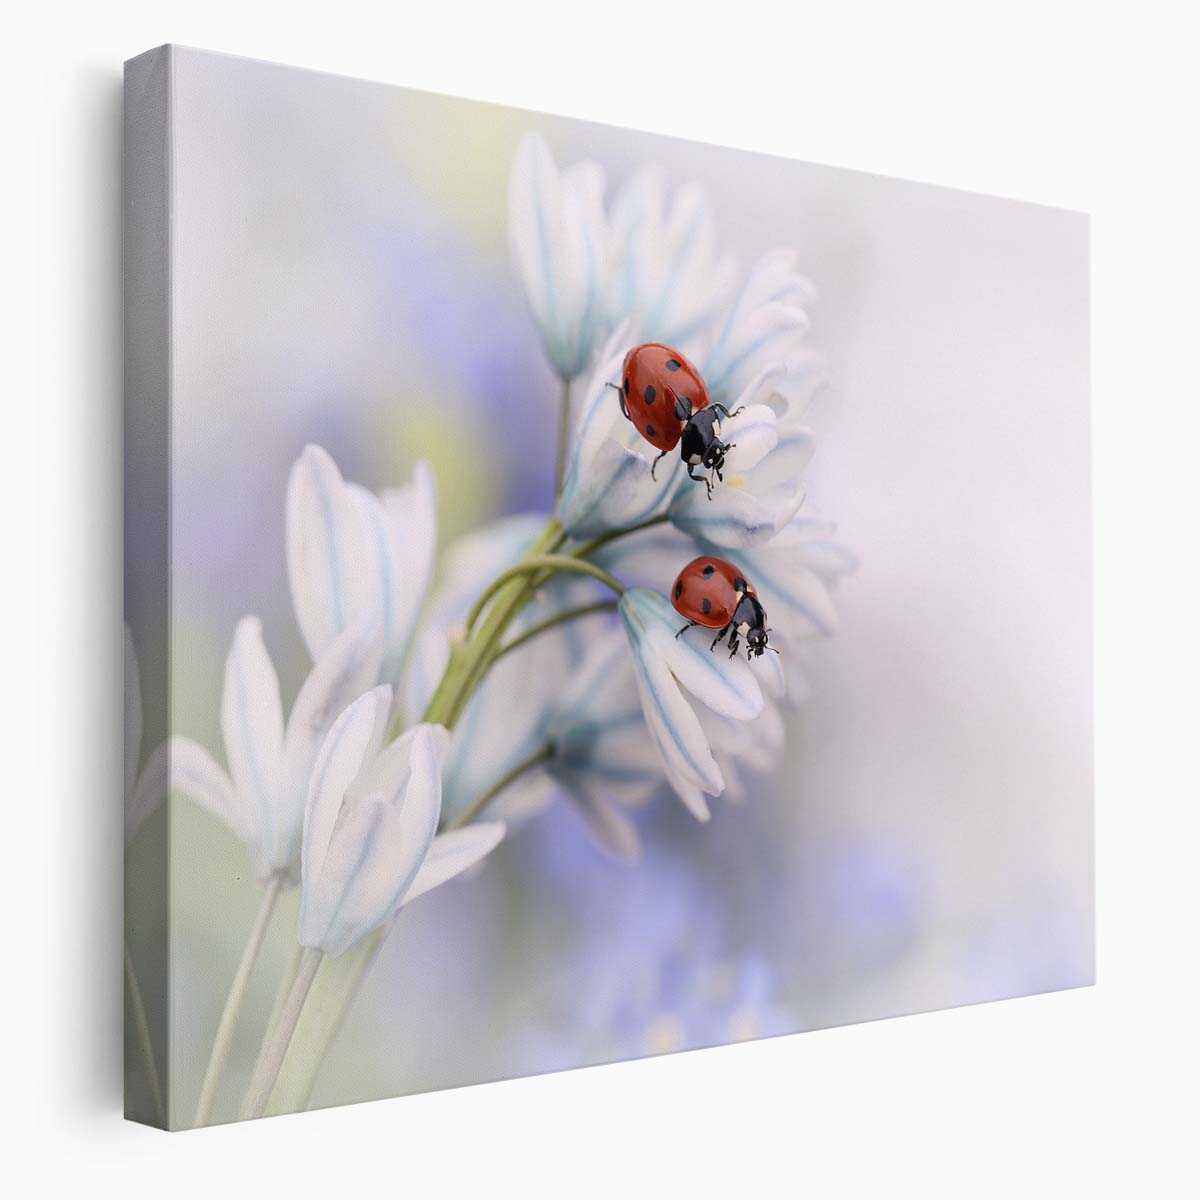 Romantic Ladybird Duo on Delicate Flower Wall Art by Luxuriance Designs. Made in USA.